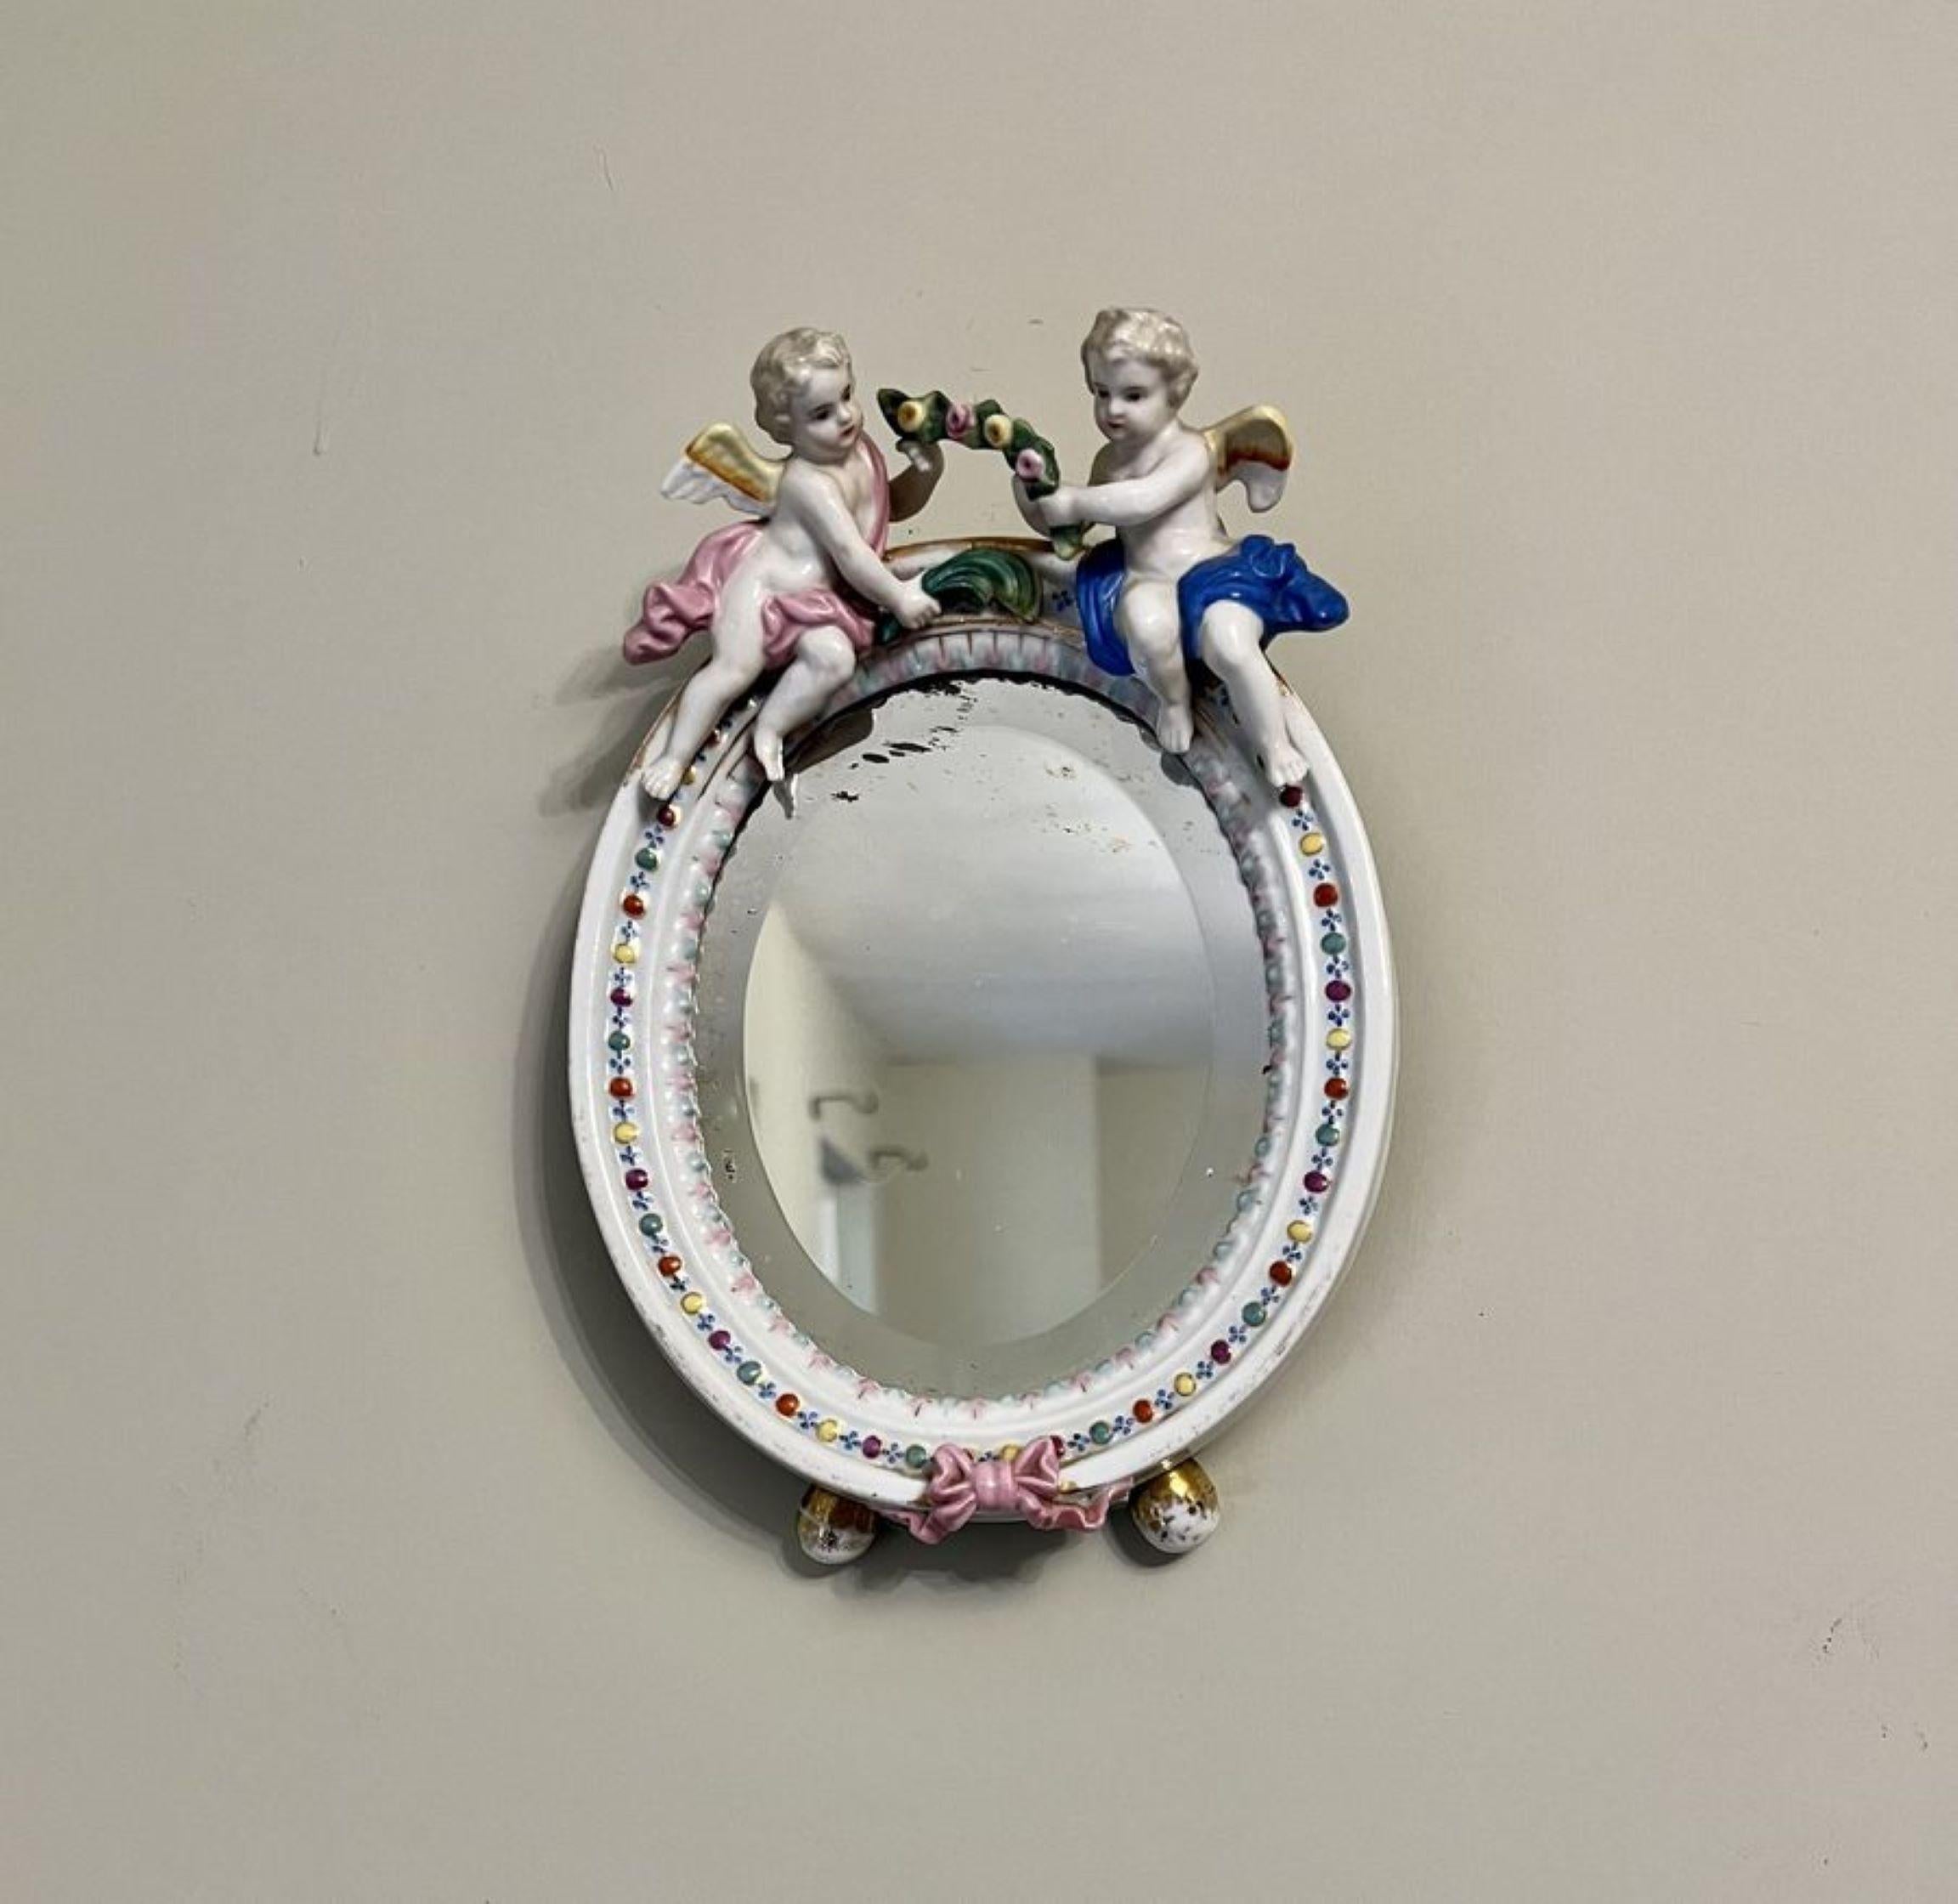 Antique Victorian quality continental porcelain oval mirror having a quality continental porcelain mirror with two cherubs to the top and pink ribbon to the bottom in wonderful hand painted blue, pink, yellow, green, orange, white and gold